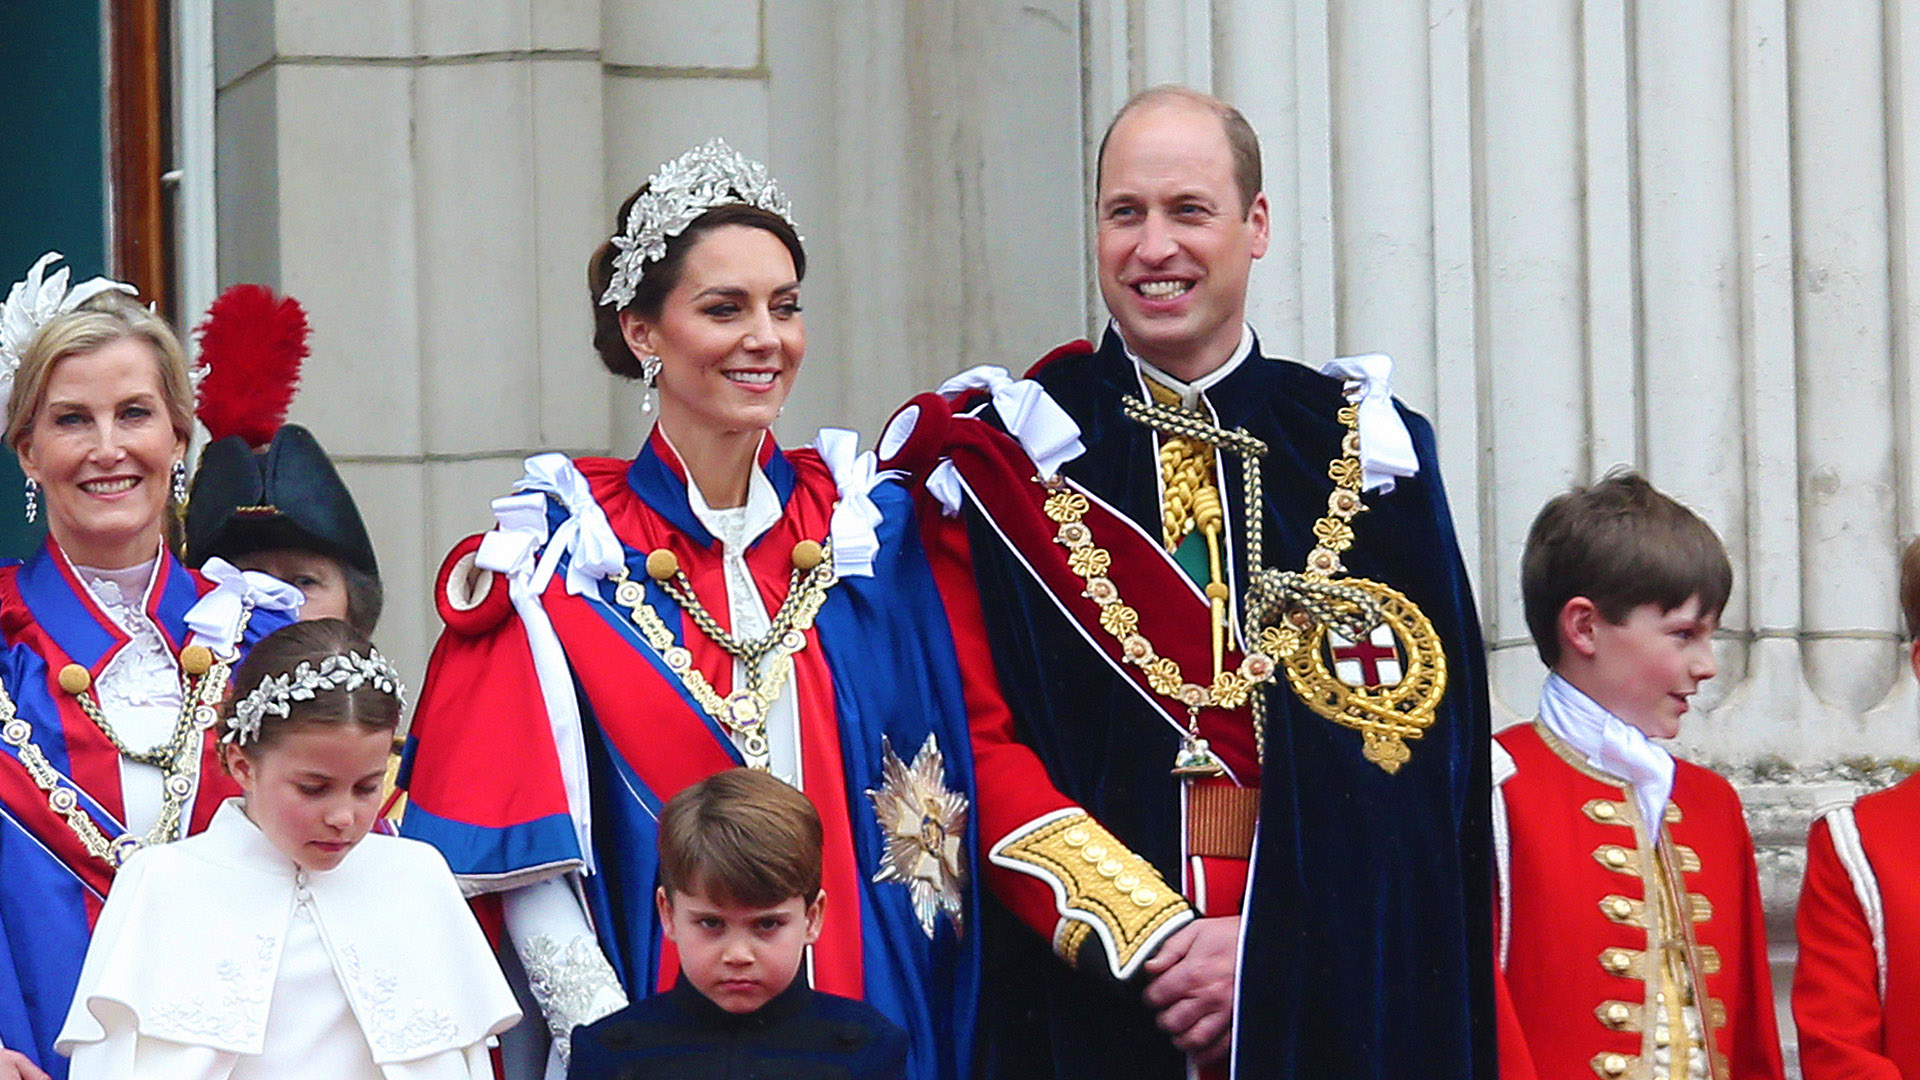 Will Prince William's Crowning as Prince of Wales Be the Next Royal Event?